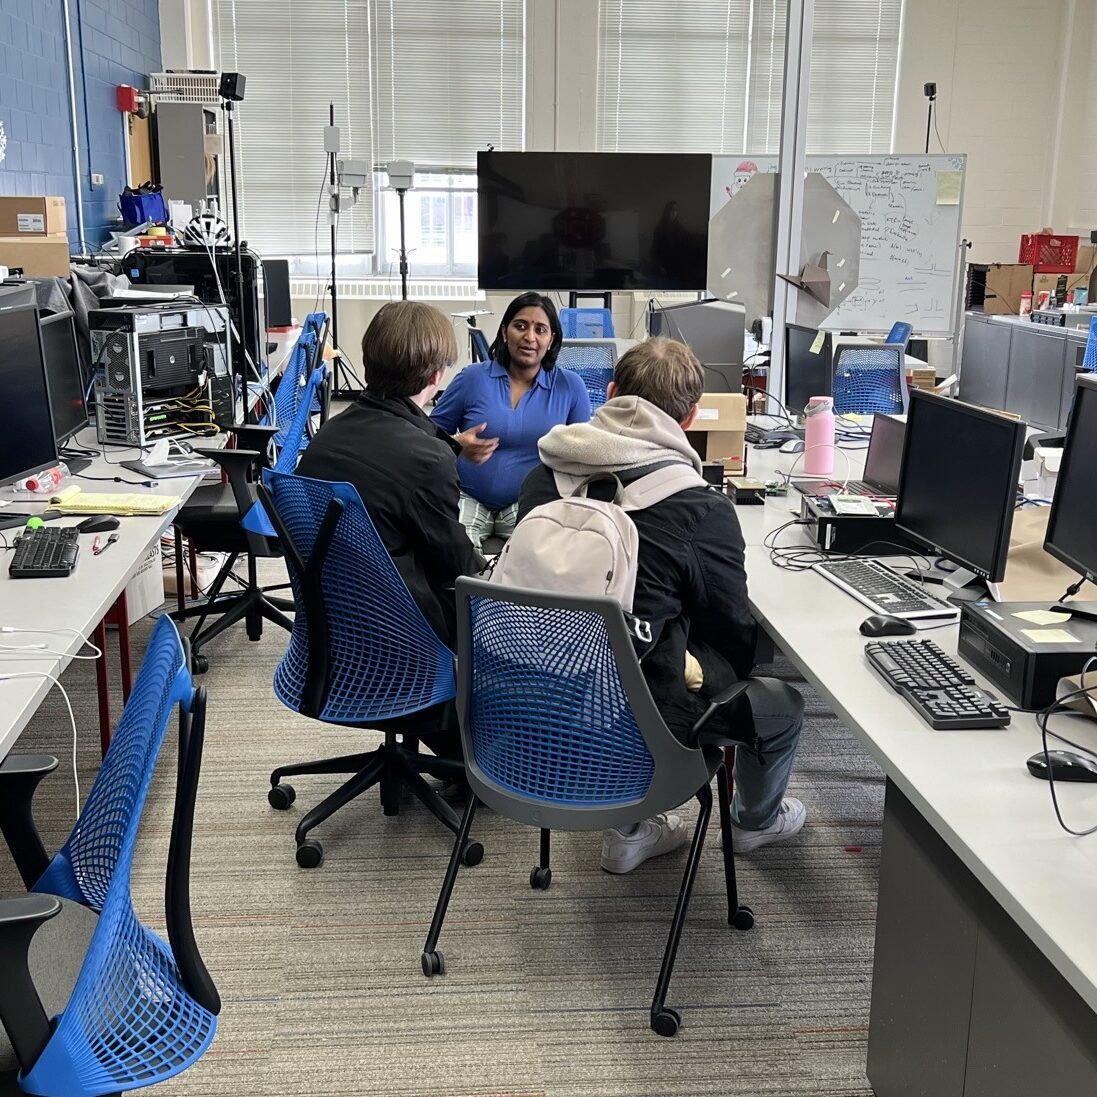 Bhuvana Krishnaswamy talks with students in a lab filled with computers